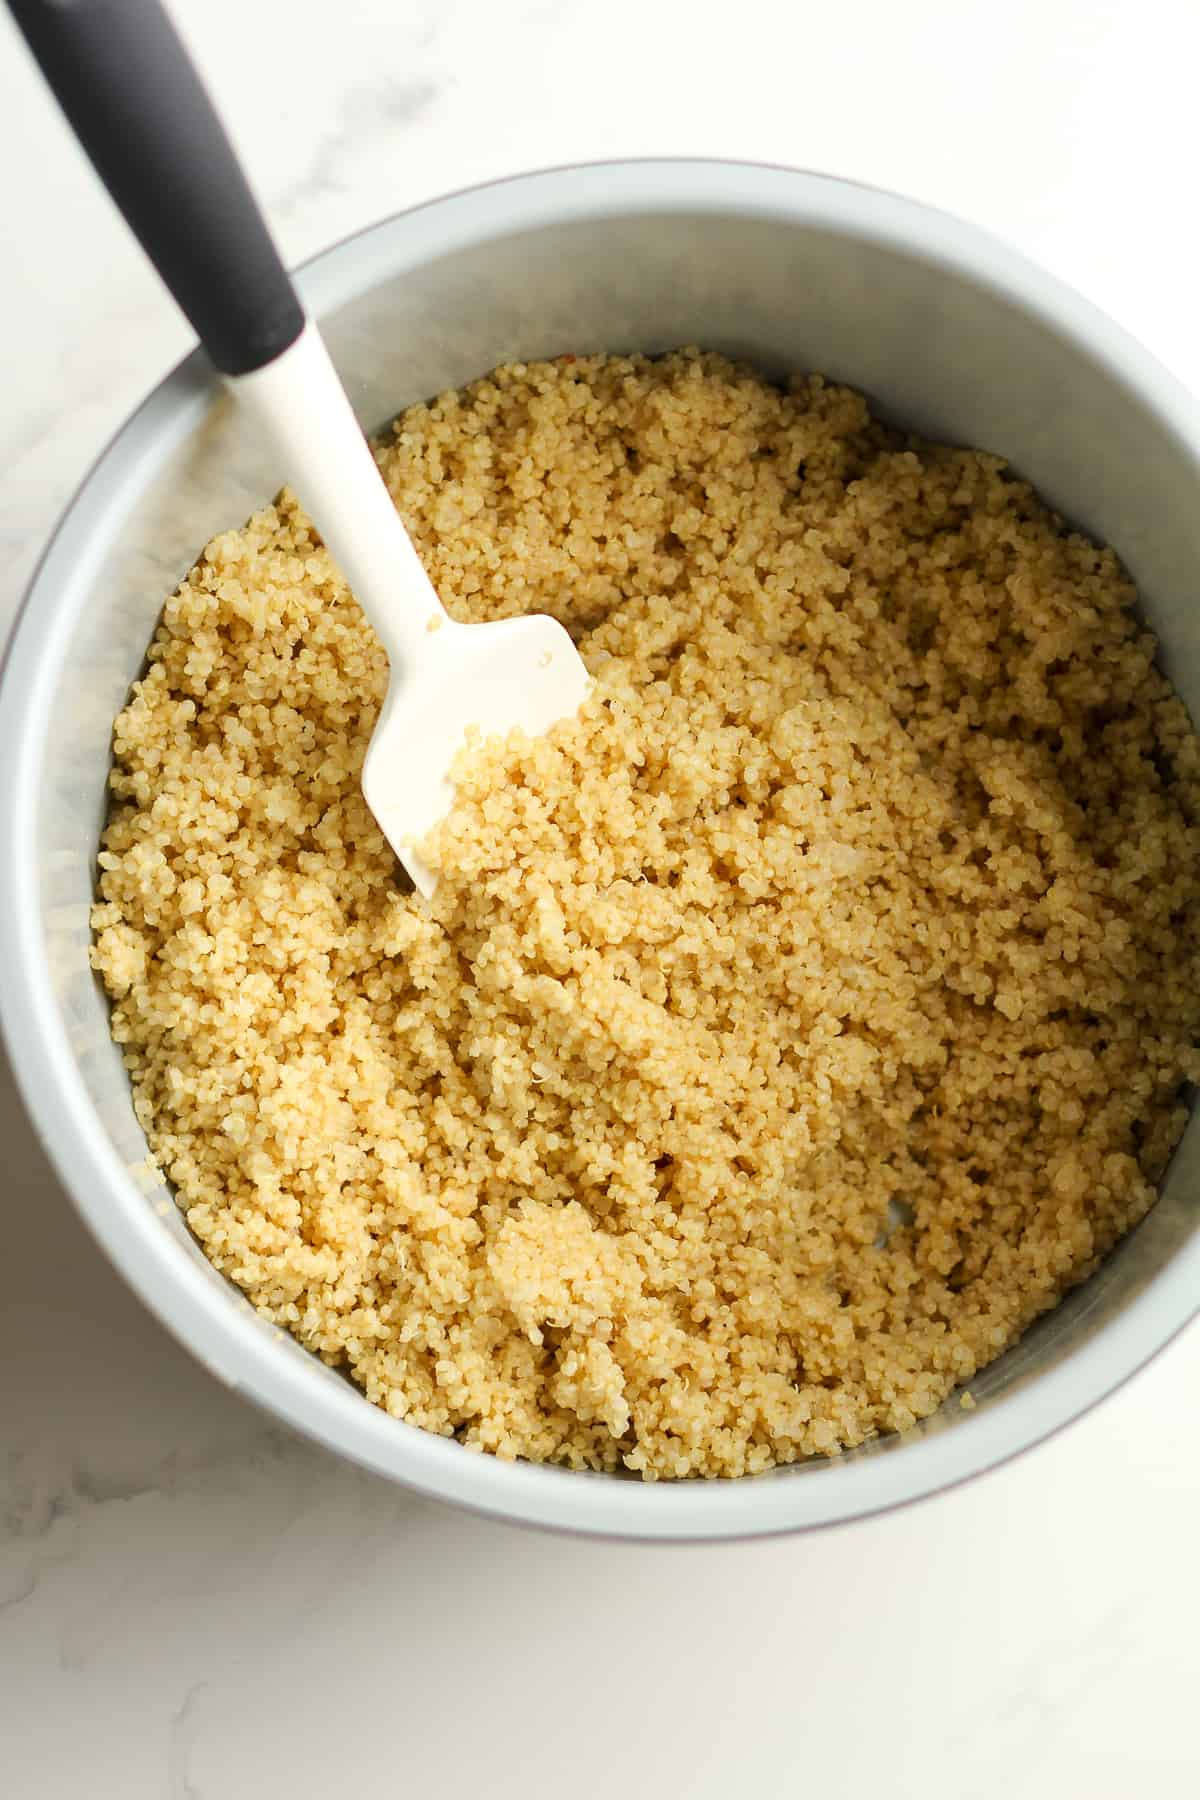 An instant pot with the cooked quinoa.